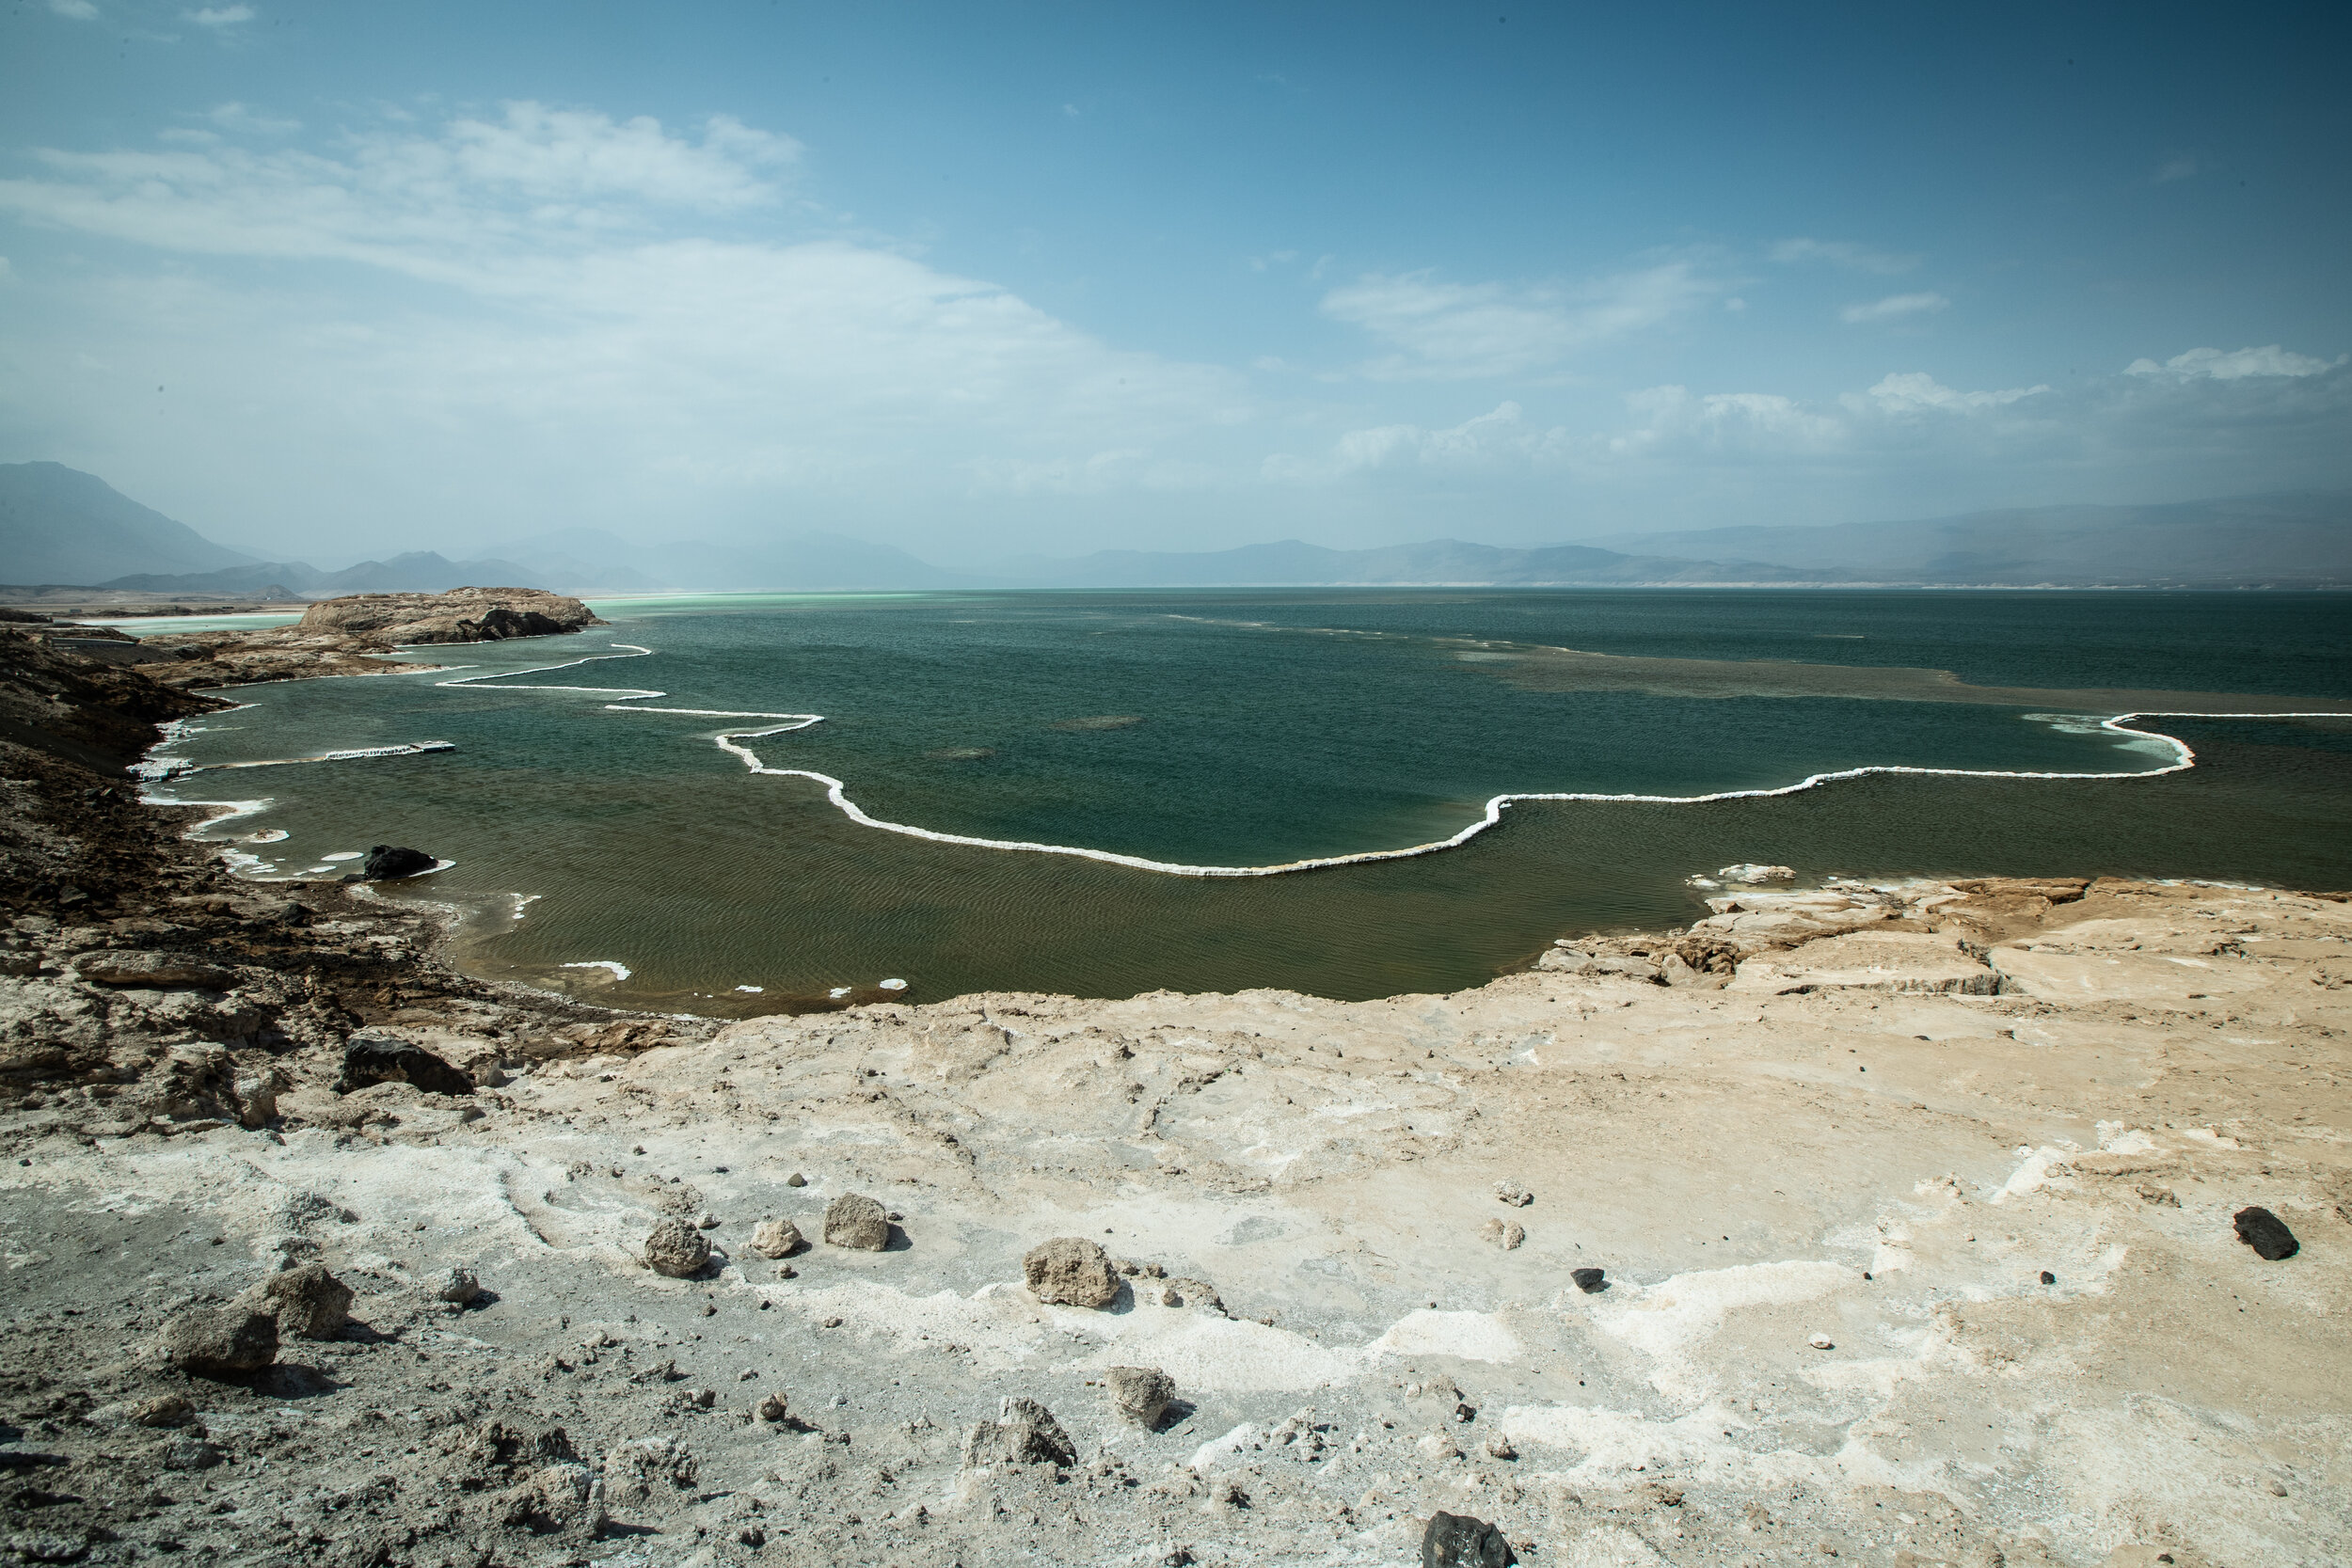  Lac Assal is located in the Danakil Desert and surrounded by dormant volcanoes and black lava fields. this lake is the second lowest point below sea level on earth, after the Dead Sea. the white dry string seen in this picture is a salt bed formed b